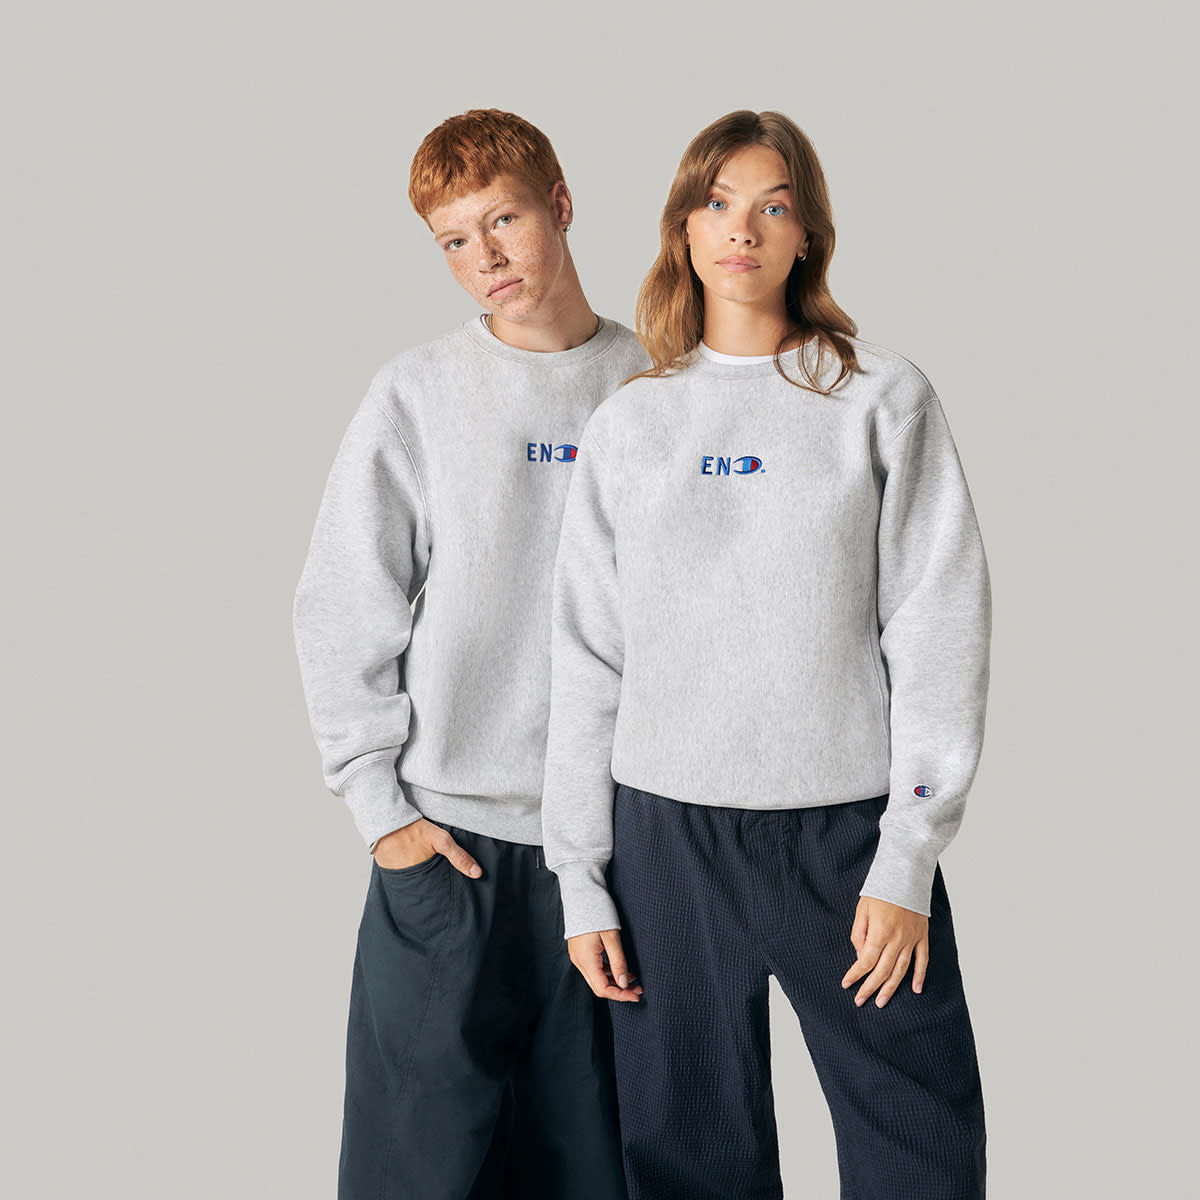 END. x Champion Reverse Weave Crew Sweat (Grey Marl) | END. Launches